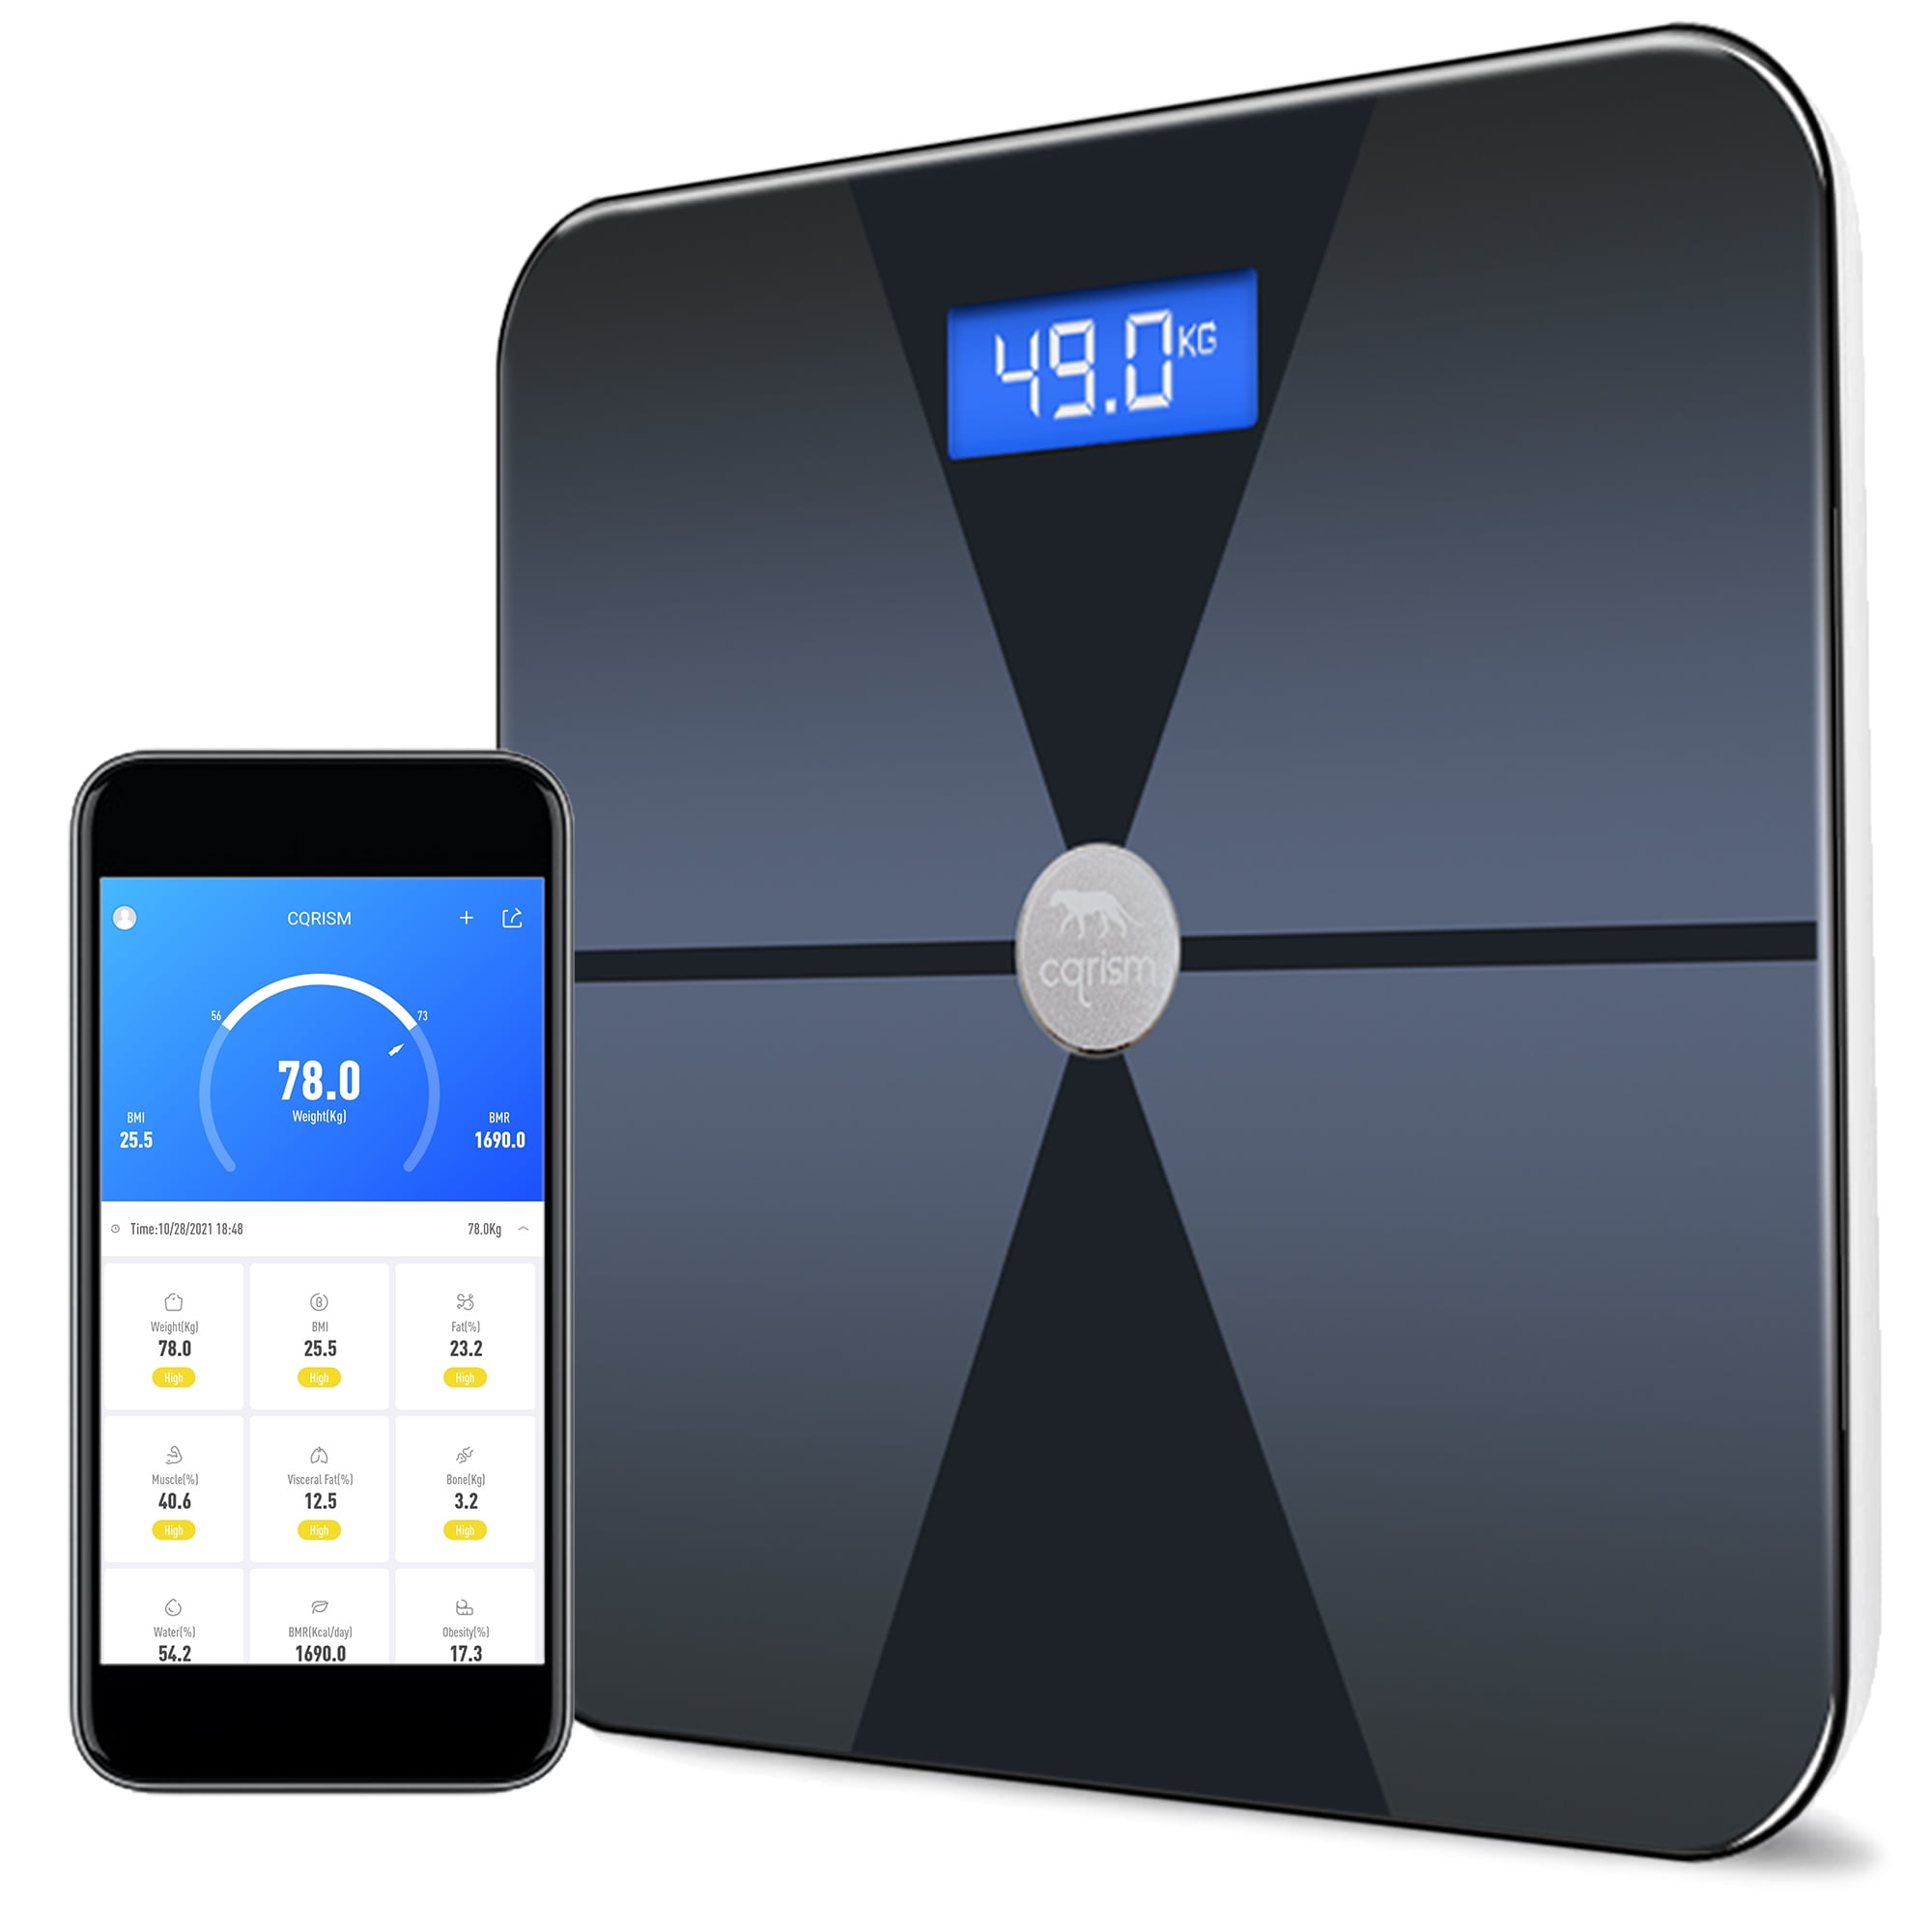 69.99$Smart Scale for Body Weight, 24-Measurement Digital Bathroom Scale  with Accurate Heart Rate, BMI, Muscle Mass Analysis, Smart Bluetooth Scale  Compatible with Apple Health for Fitness : r/ReviewRequests